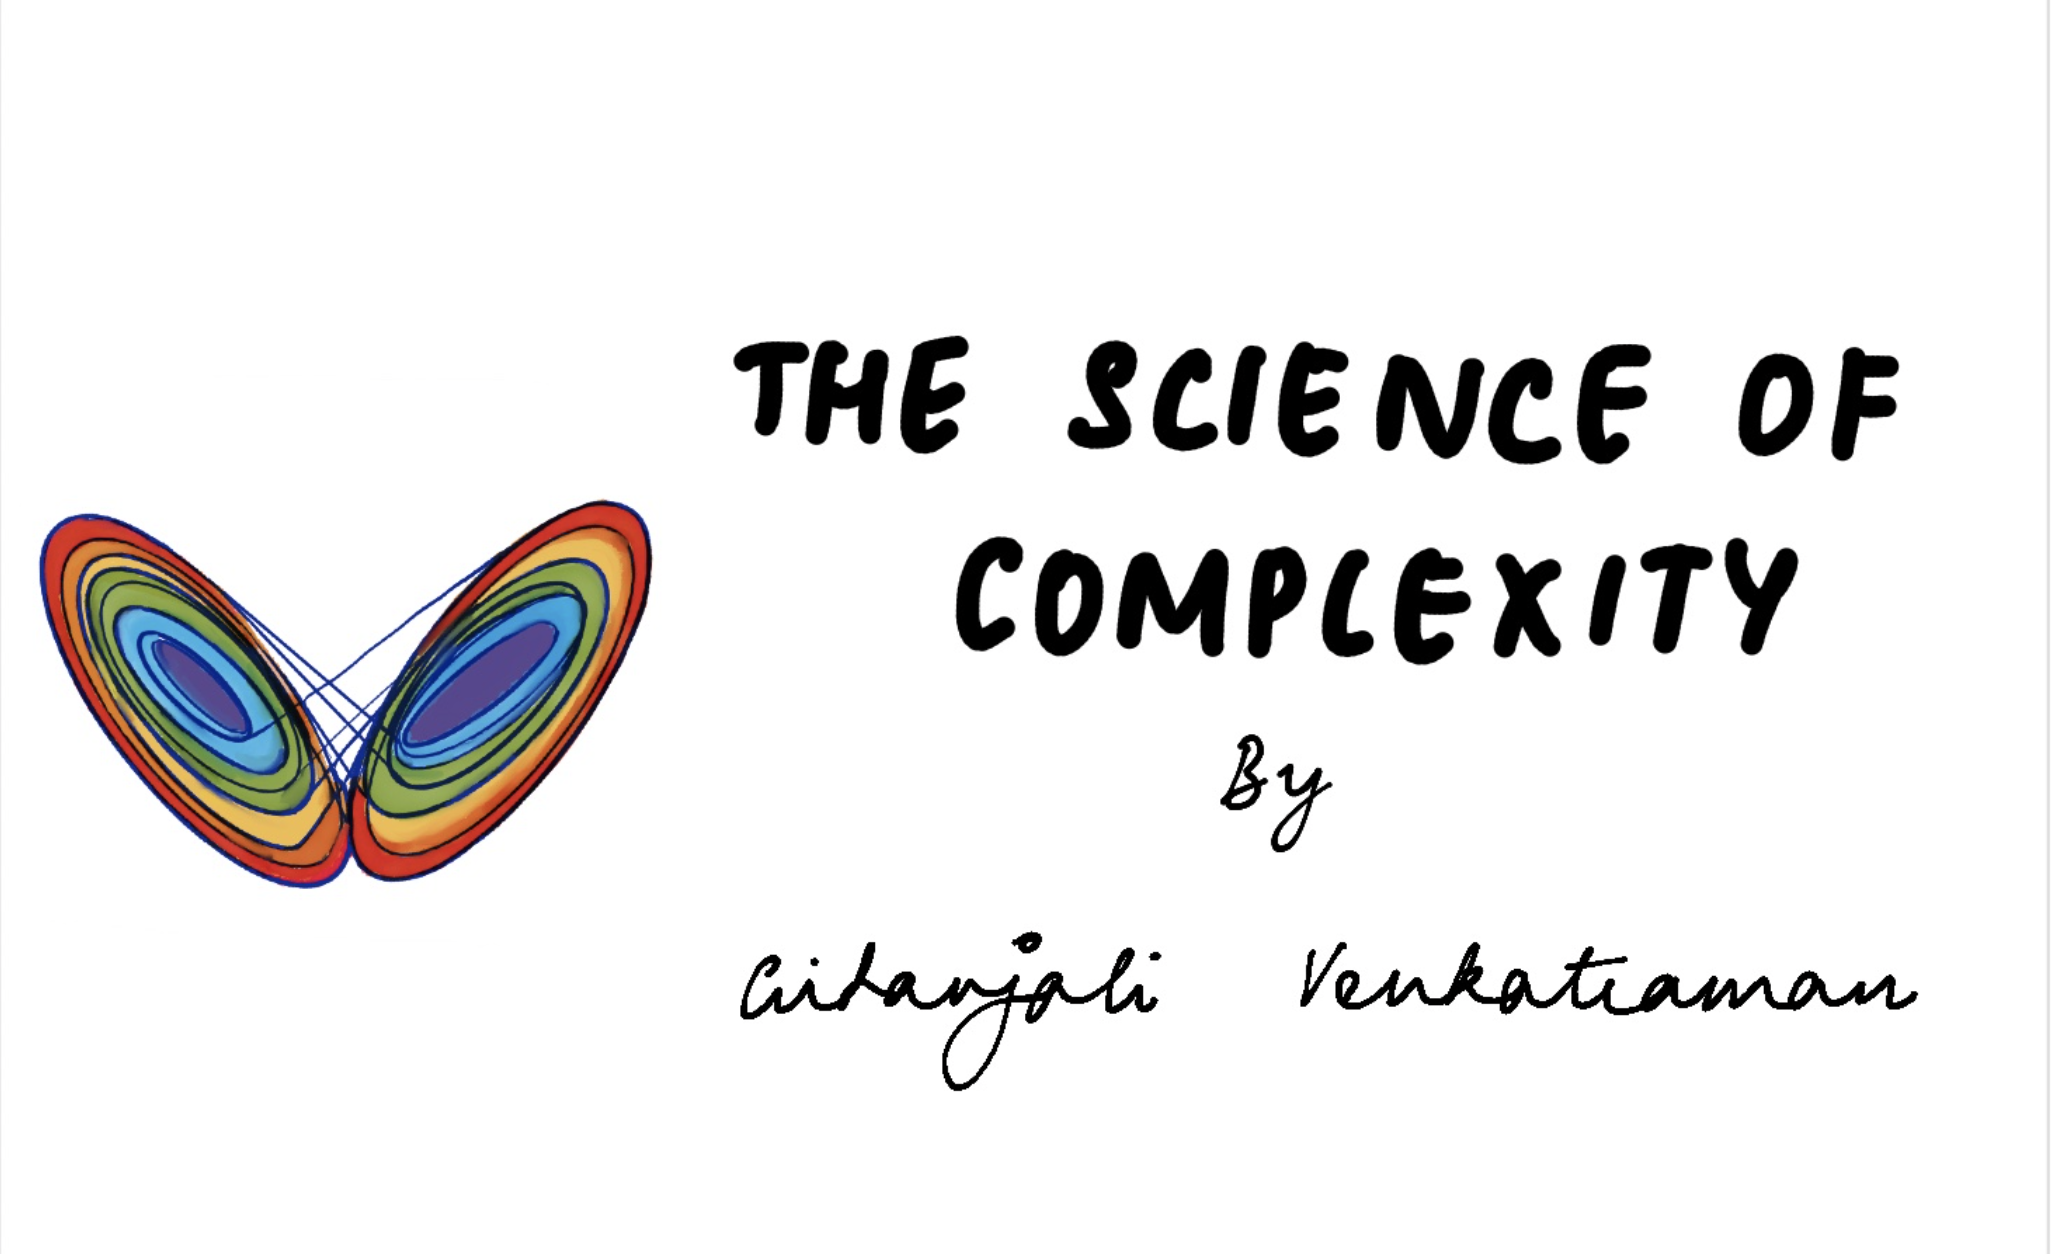 The science of complexity